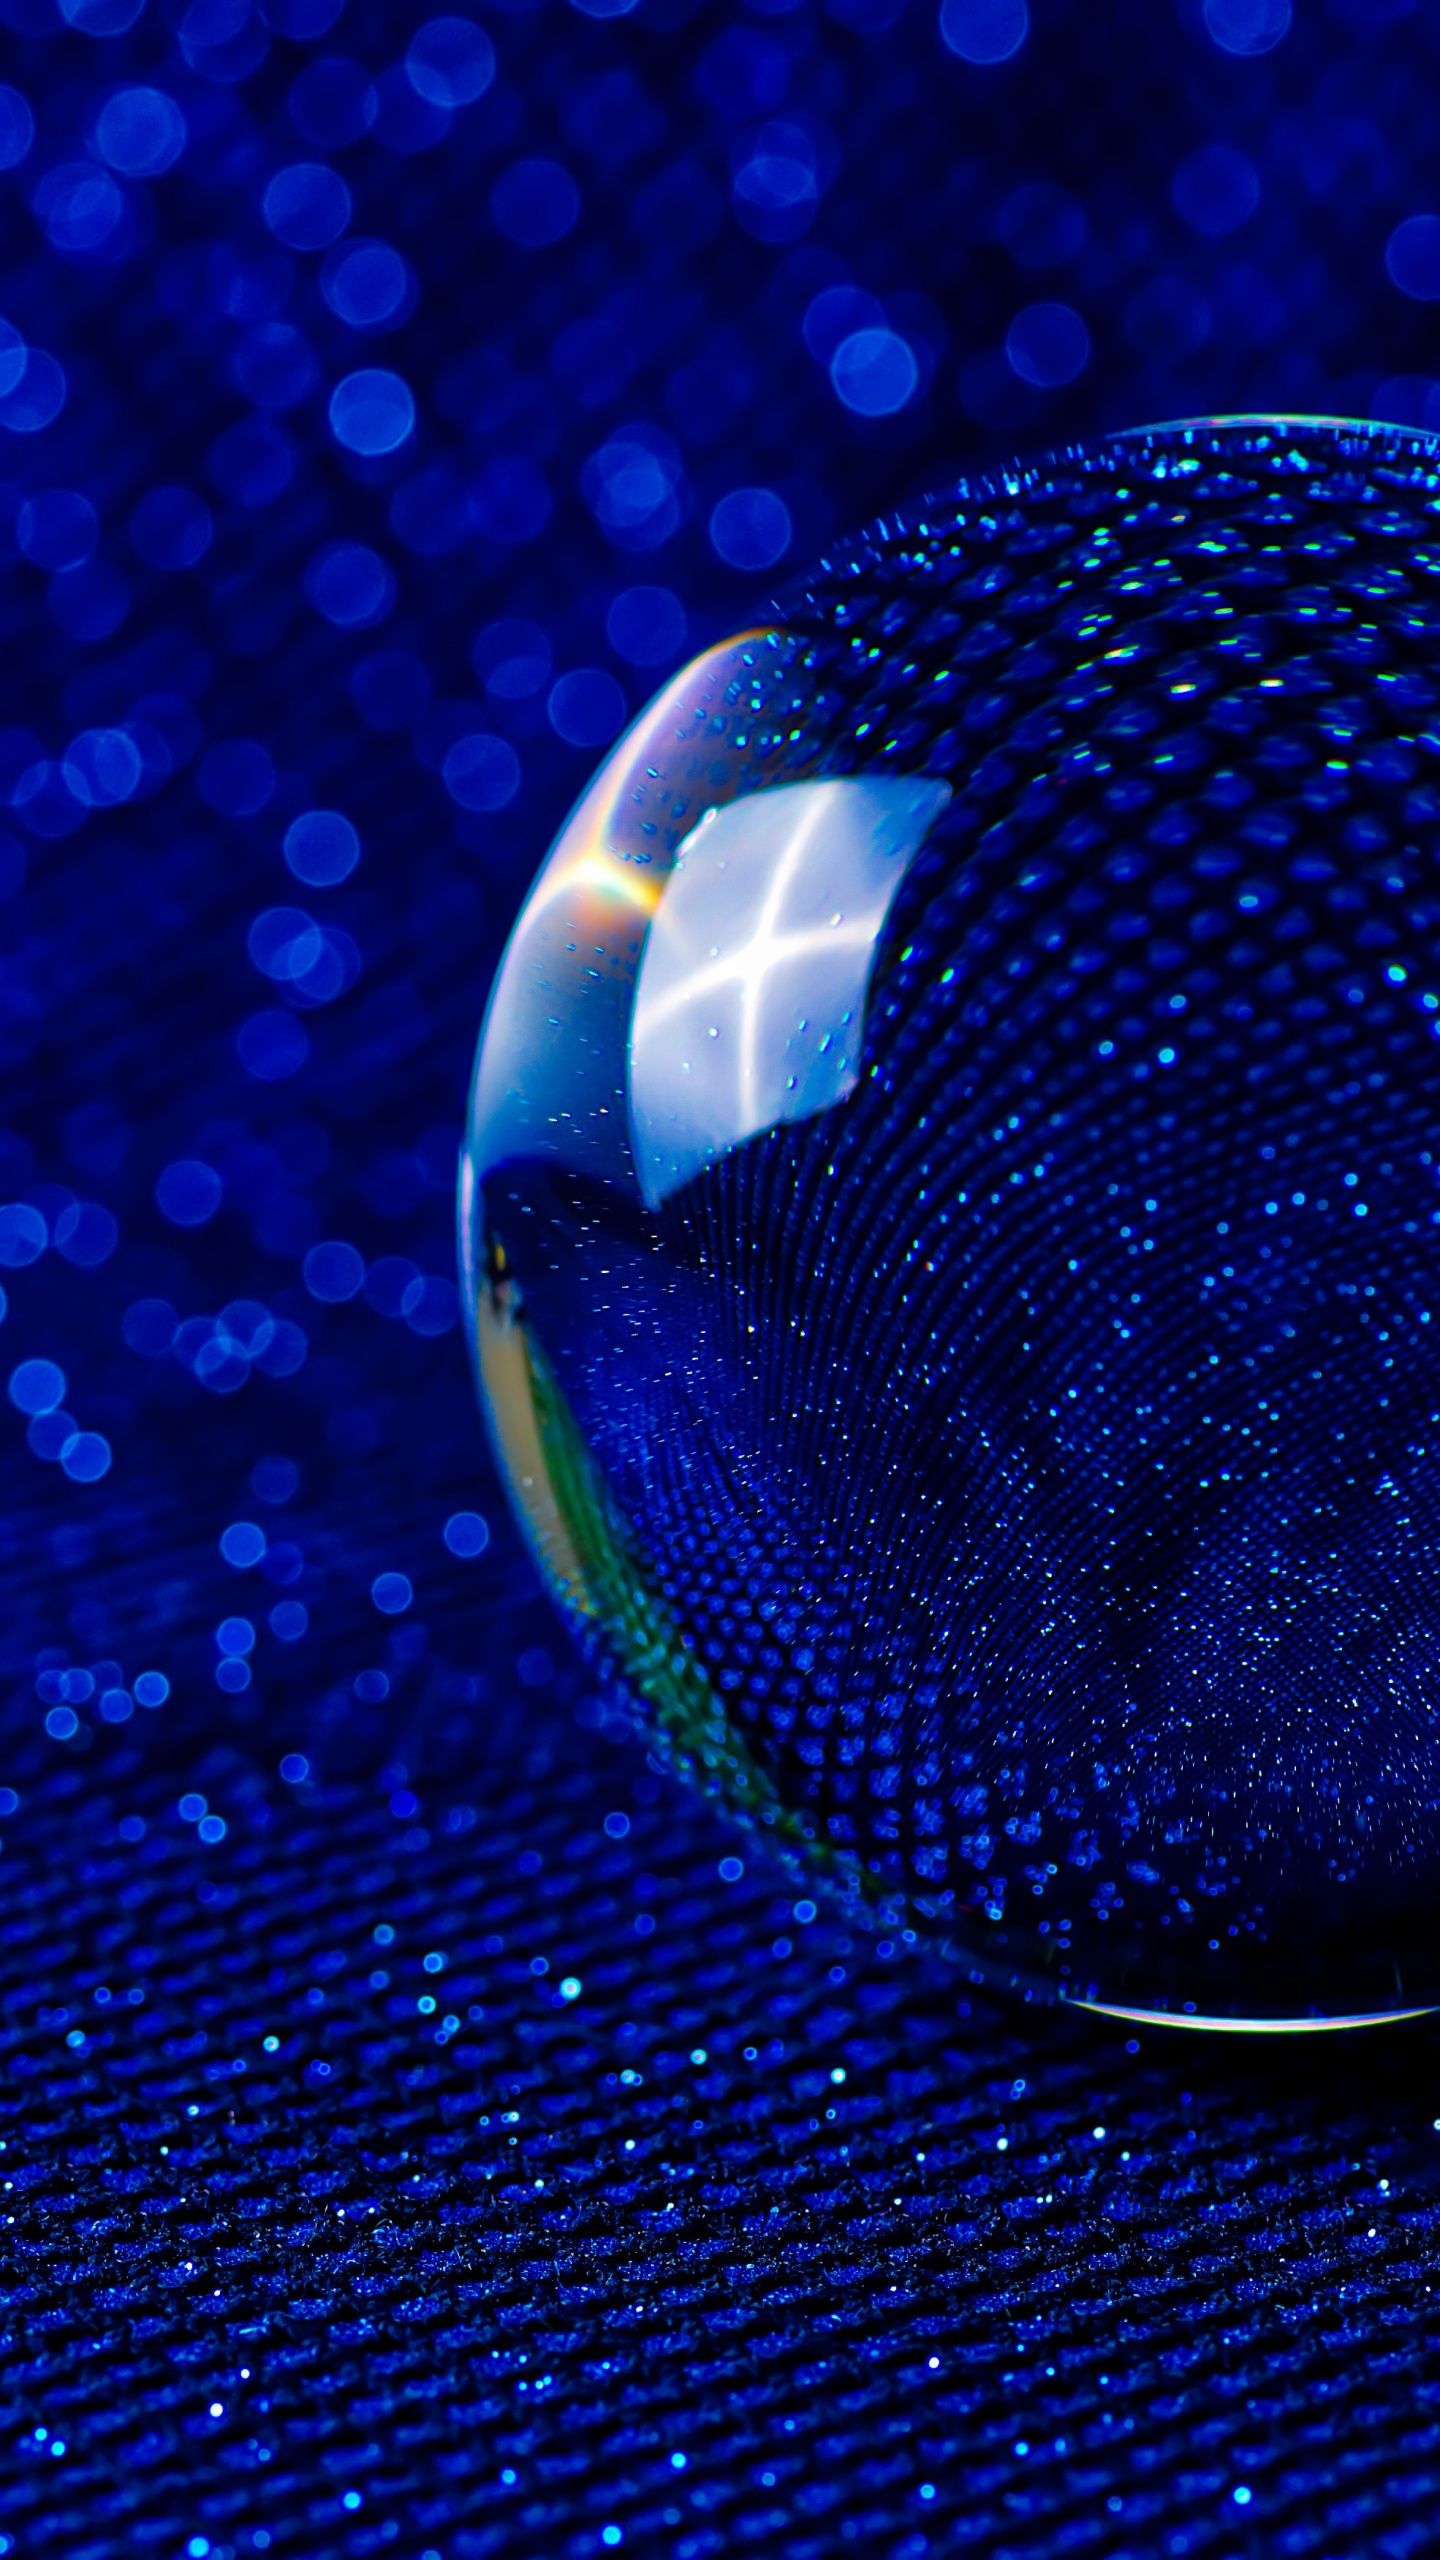 A crystal ball on a blue background with bokeh effect. - Dark blue